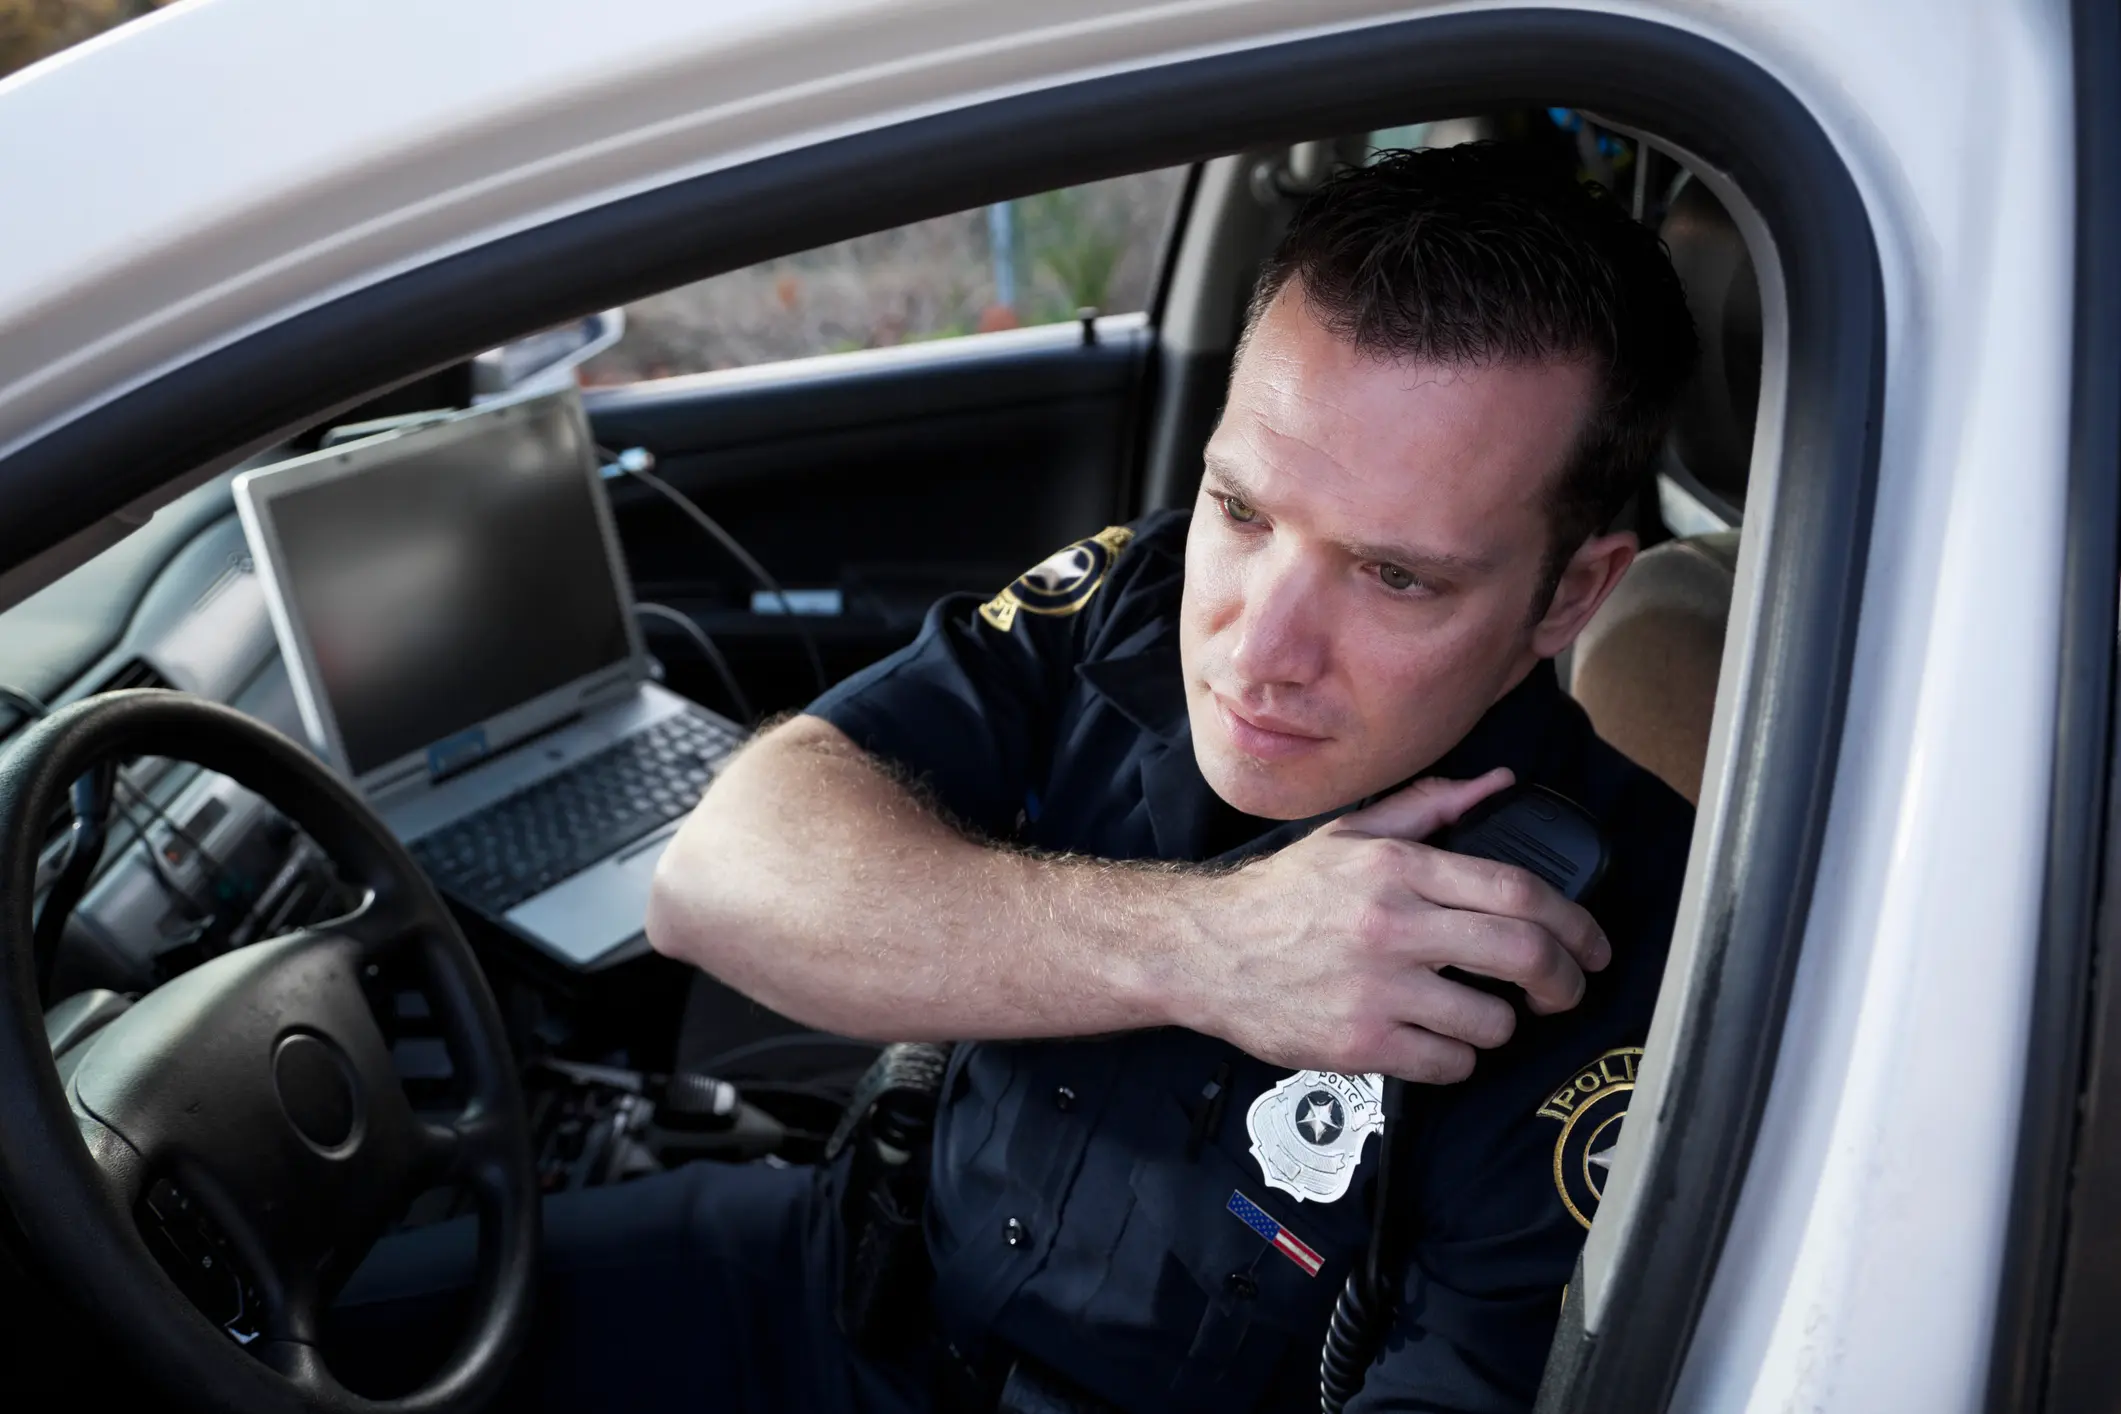 police officer sitting in car with laptop